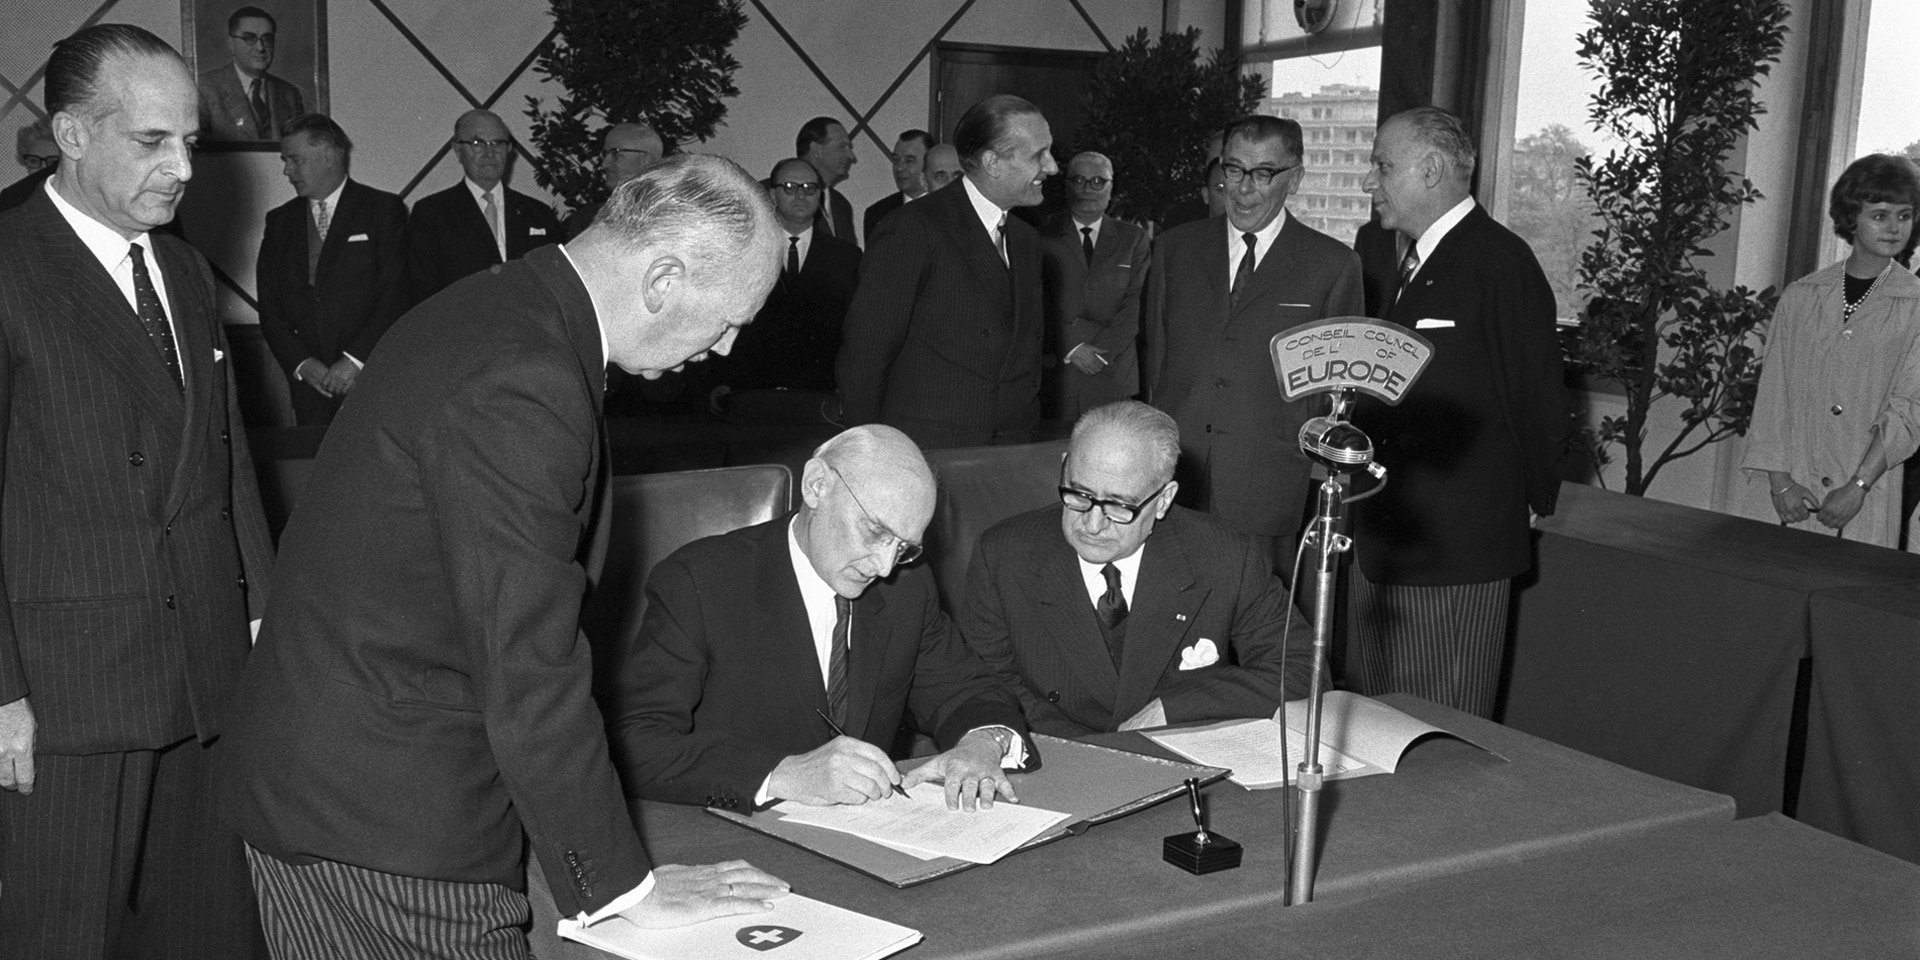 Federal Councillor Friedrich Traugott Wahlen signs the instrument of Switzerland's accession to the Council of Europe in Strasbourg.